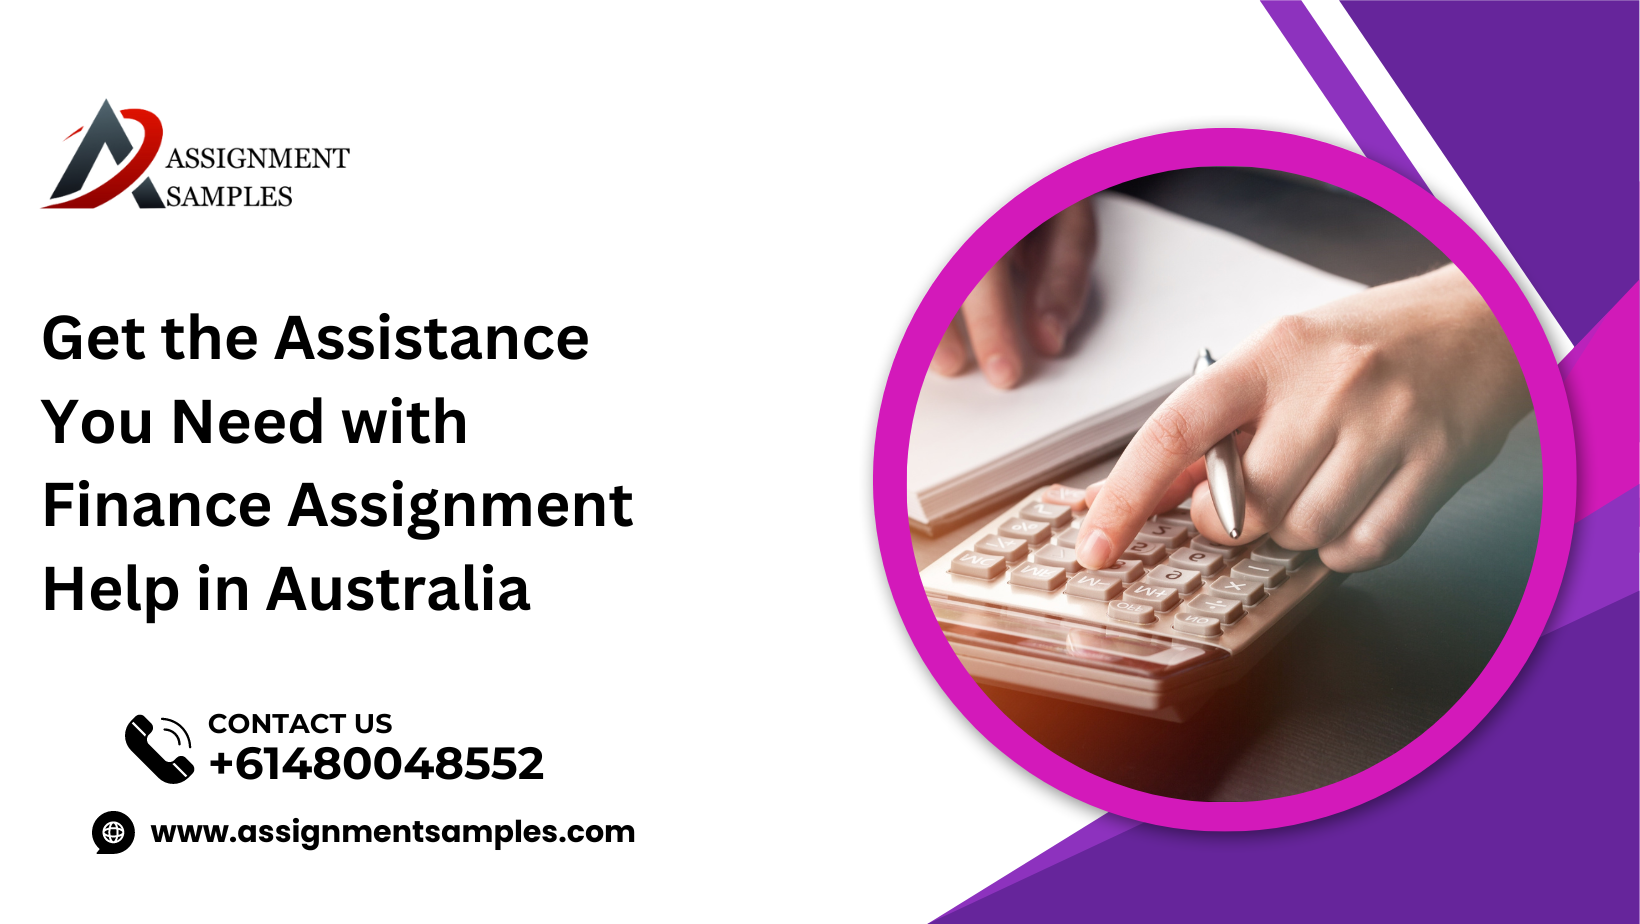 Get the Assistance You Need with Finance Assignment Help in Australia